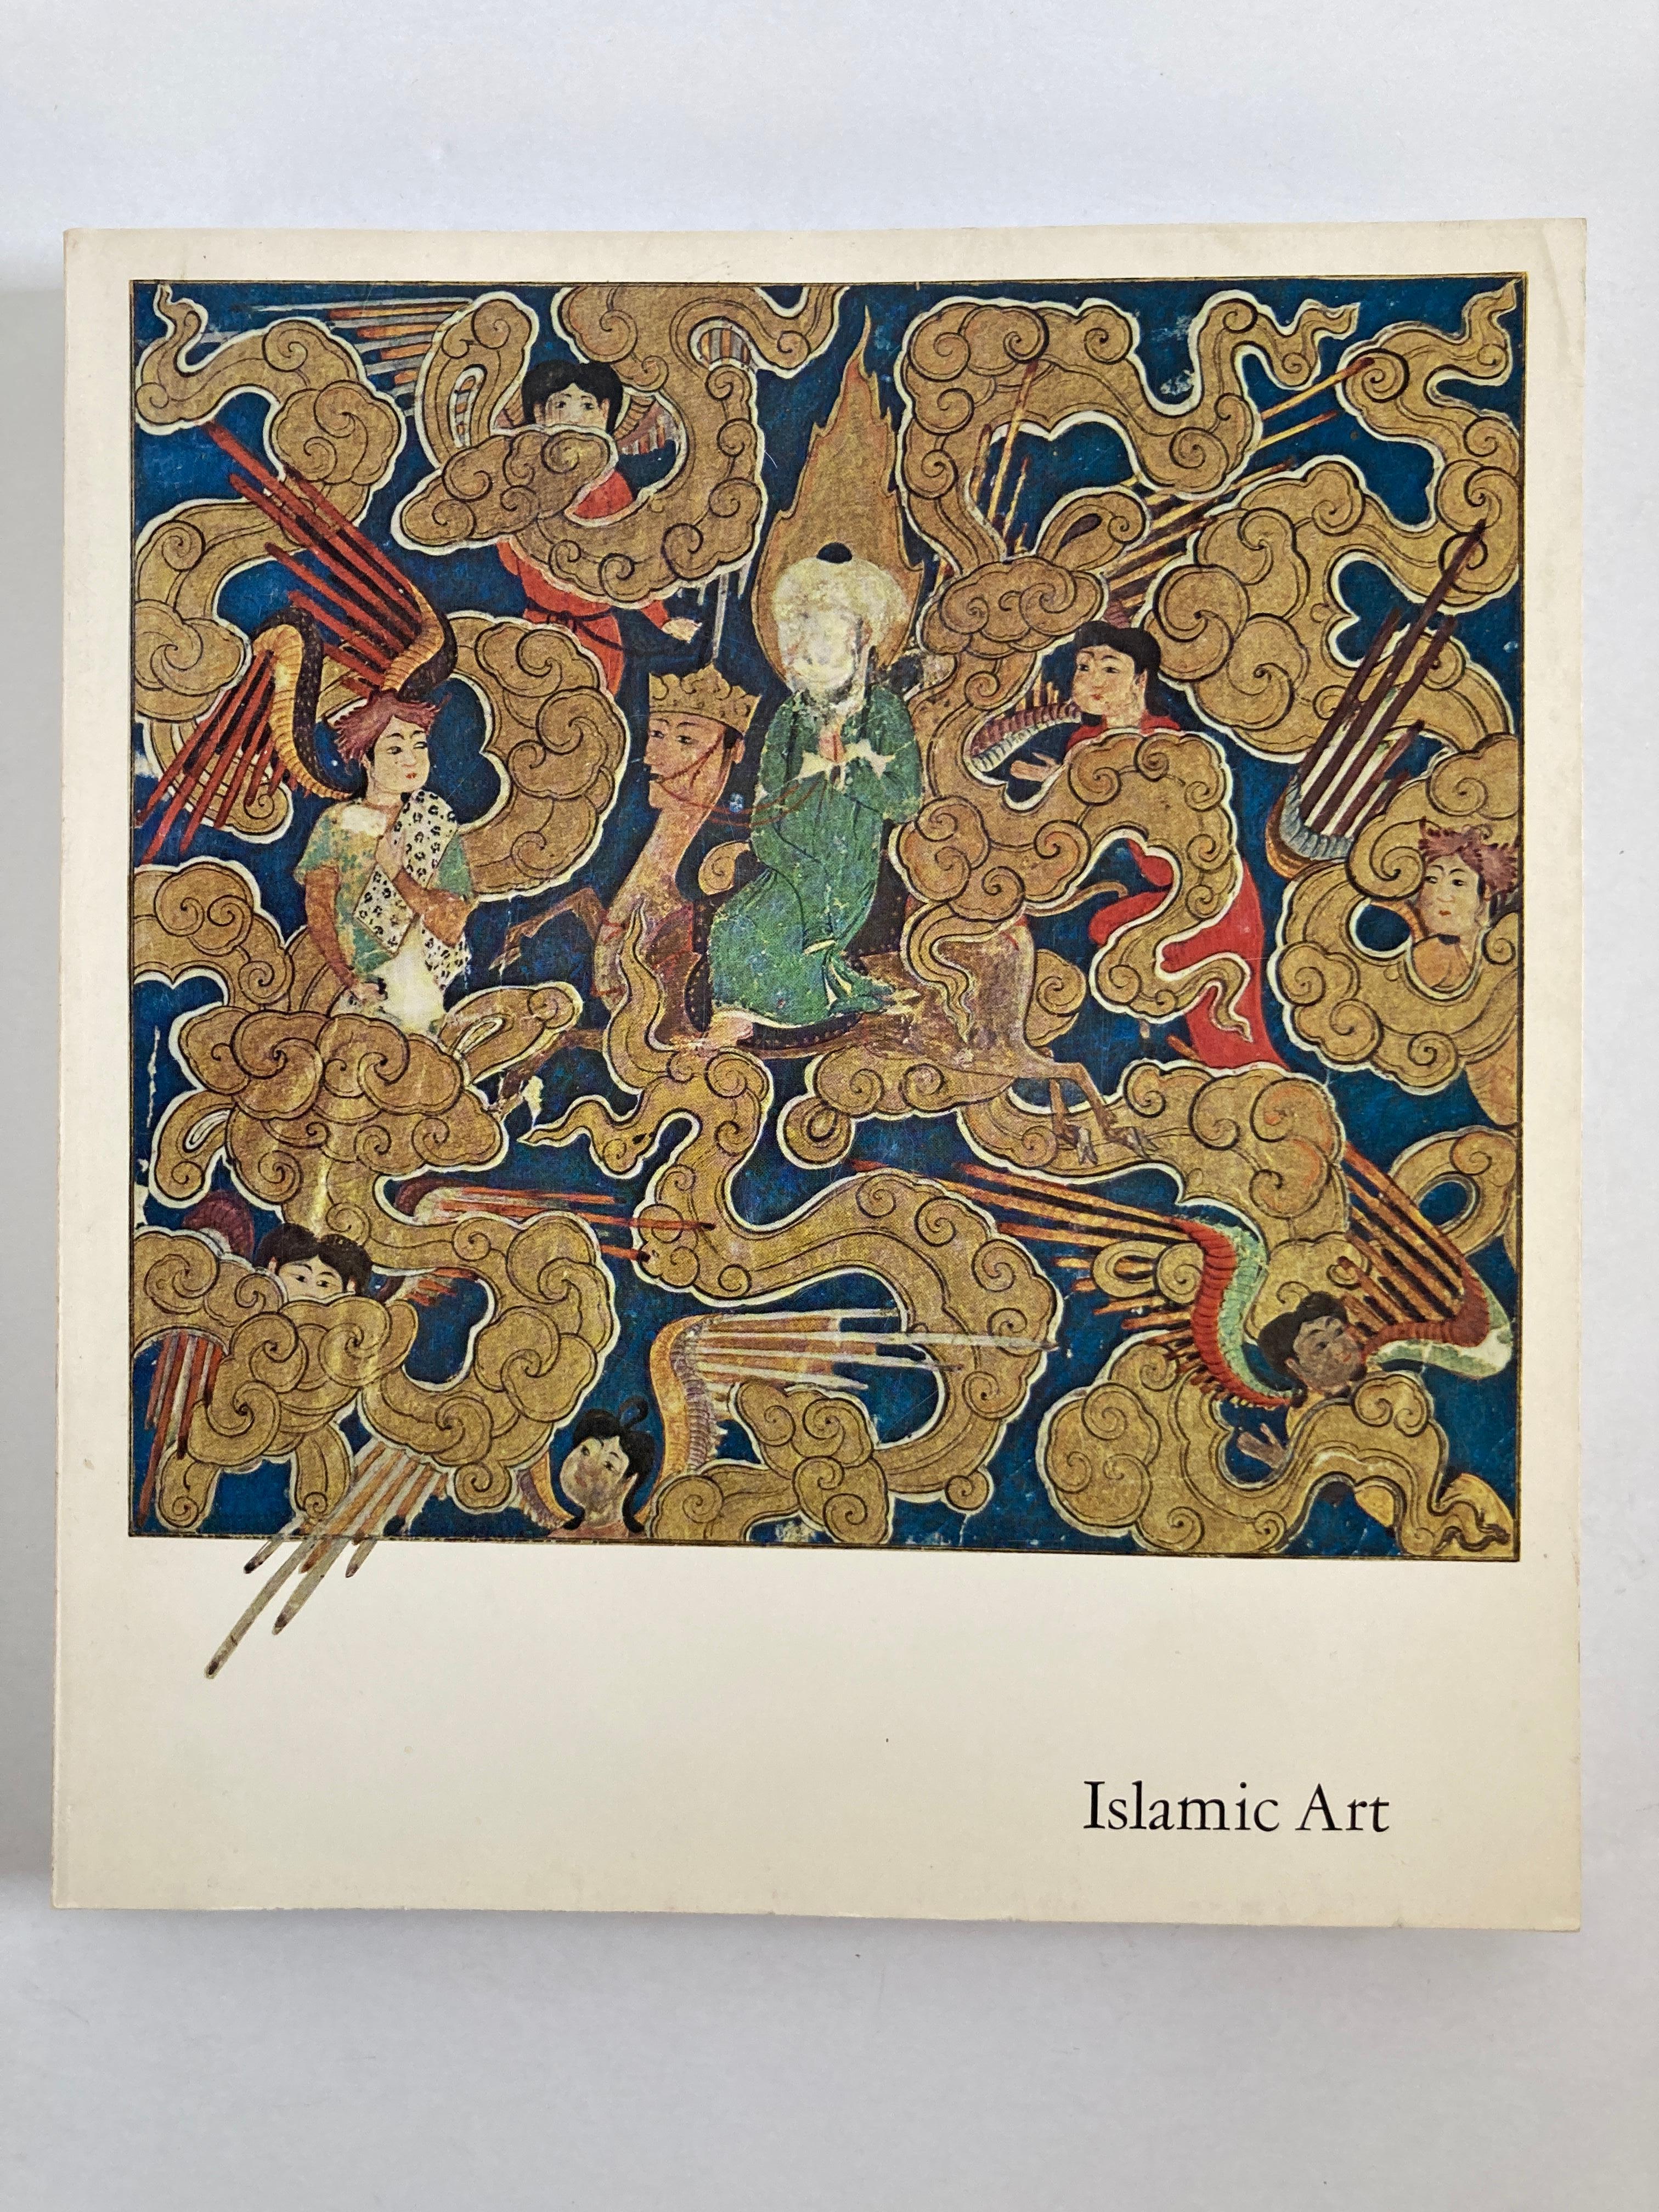 Islamic Art, The Nasli M. Heeramaneck Collection January 1, 1973 Paperback Book In Good Condition In North Hollywood, CA